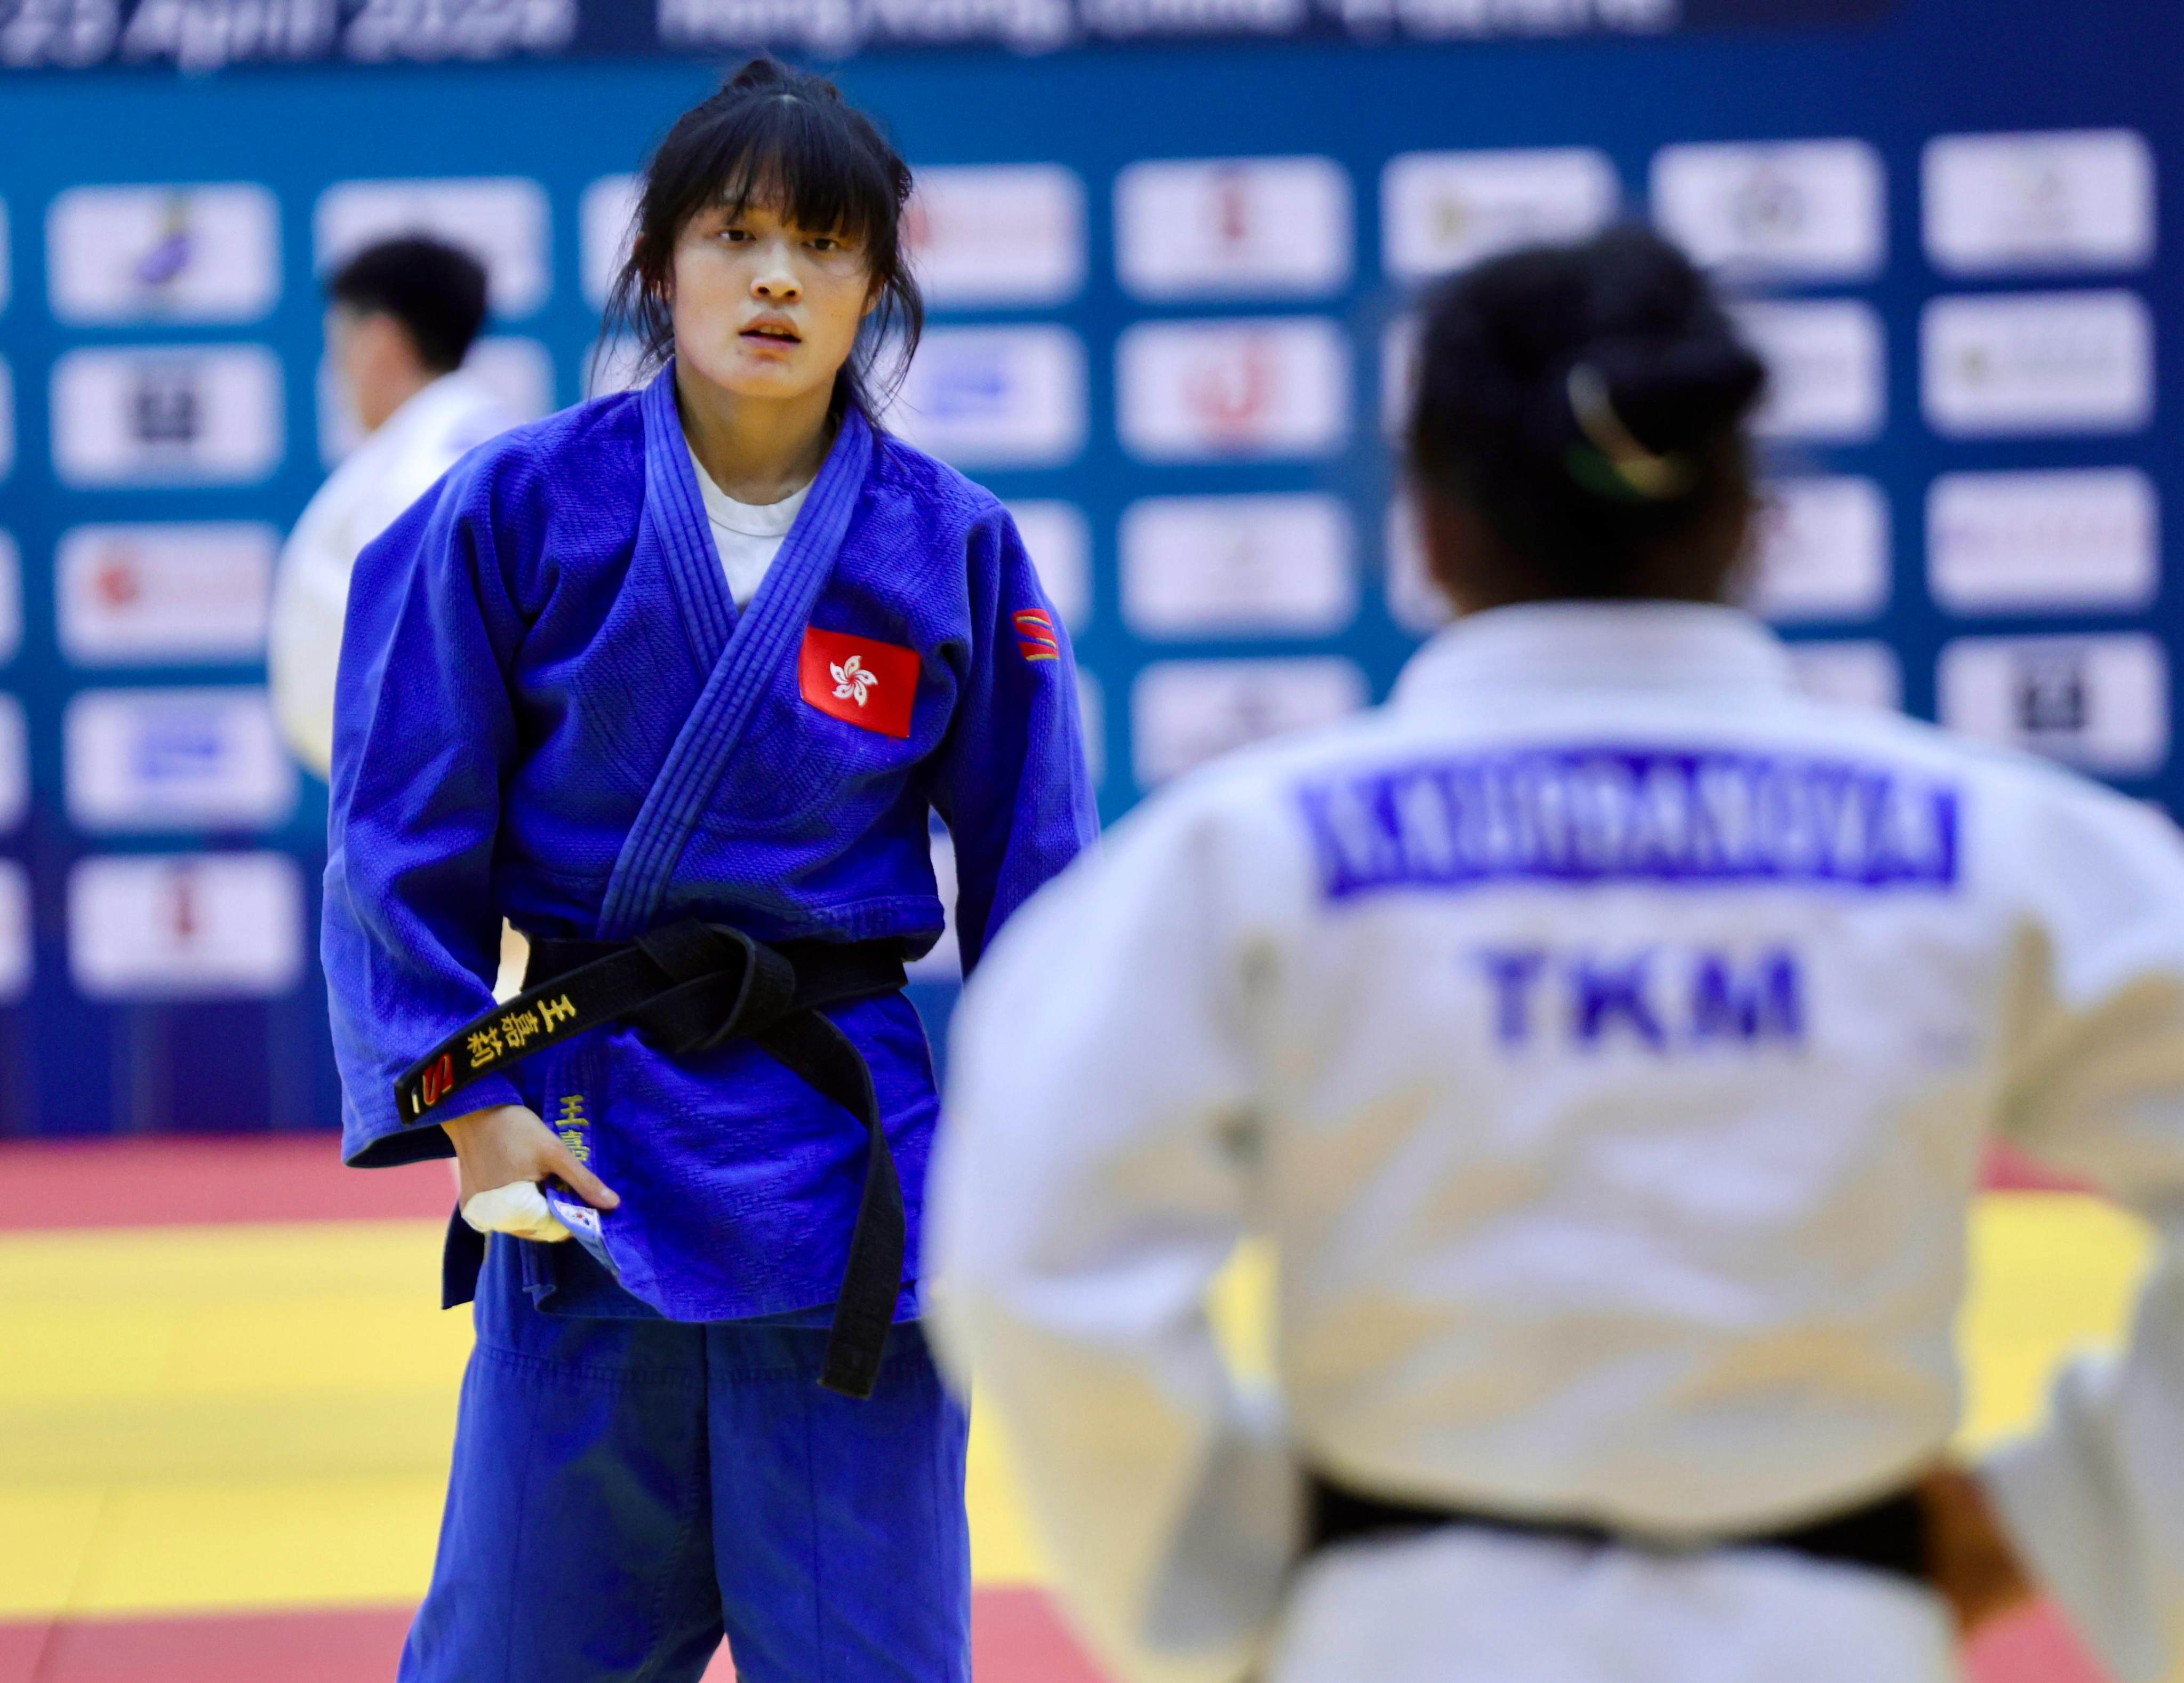 Wong Ka-lee (left) lost in the first round at the Asian Judo Championships on Saturday. Photo: Mike Chan